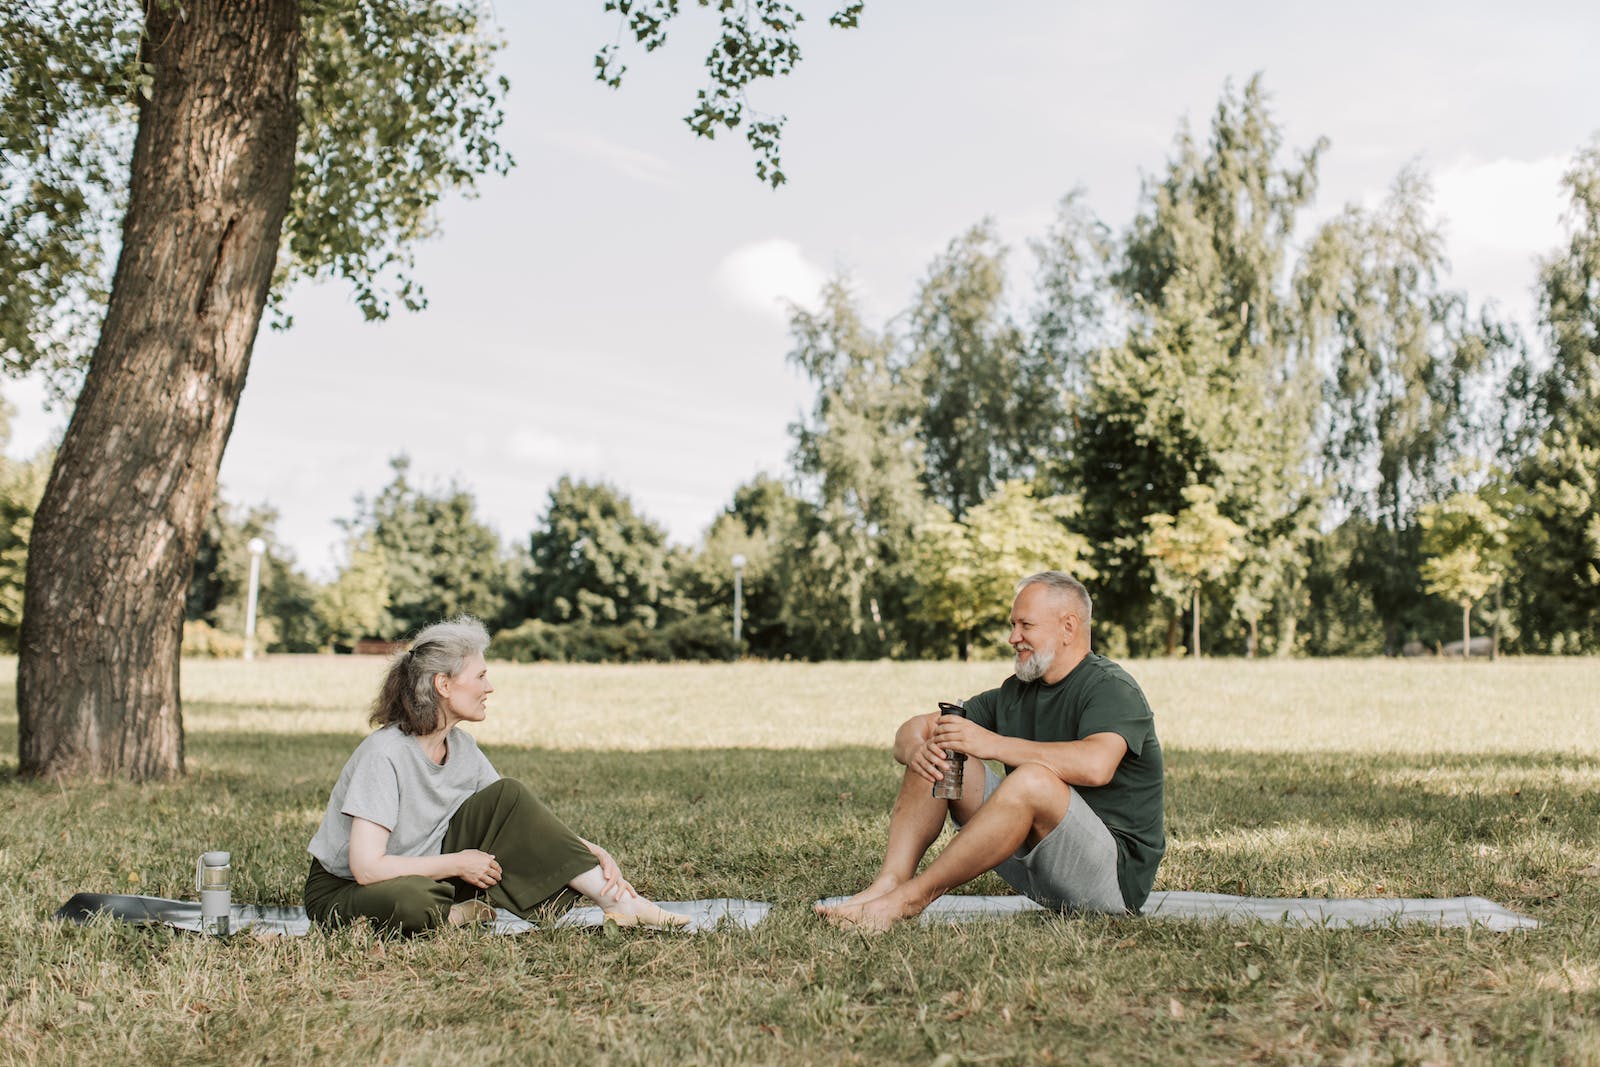 A Man and Woman Talking Together While Sitting on the Grass